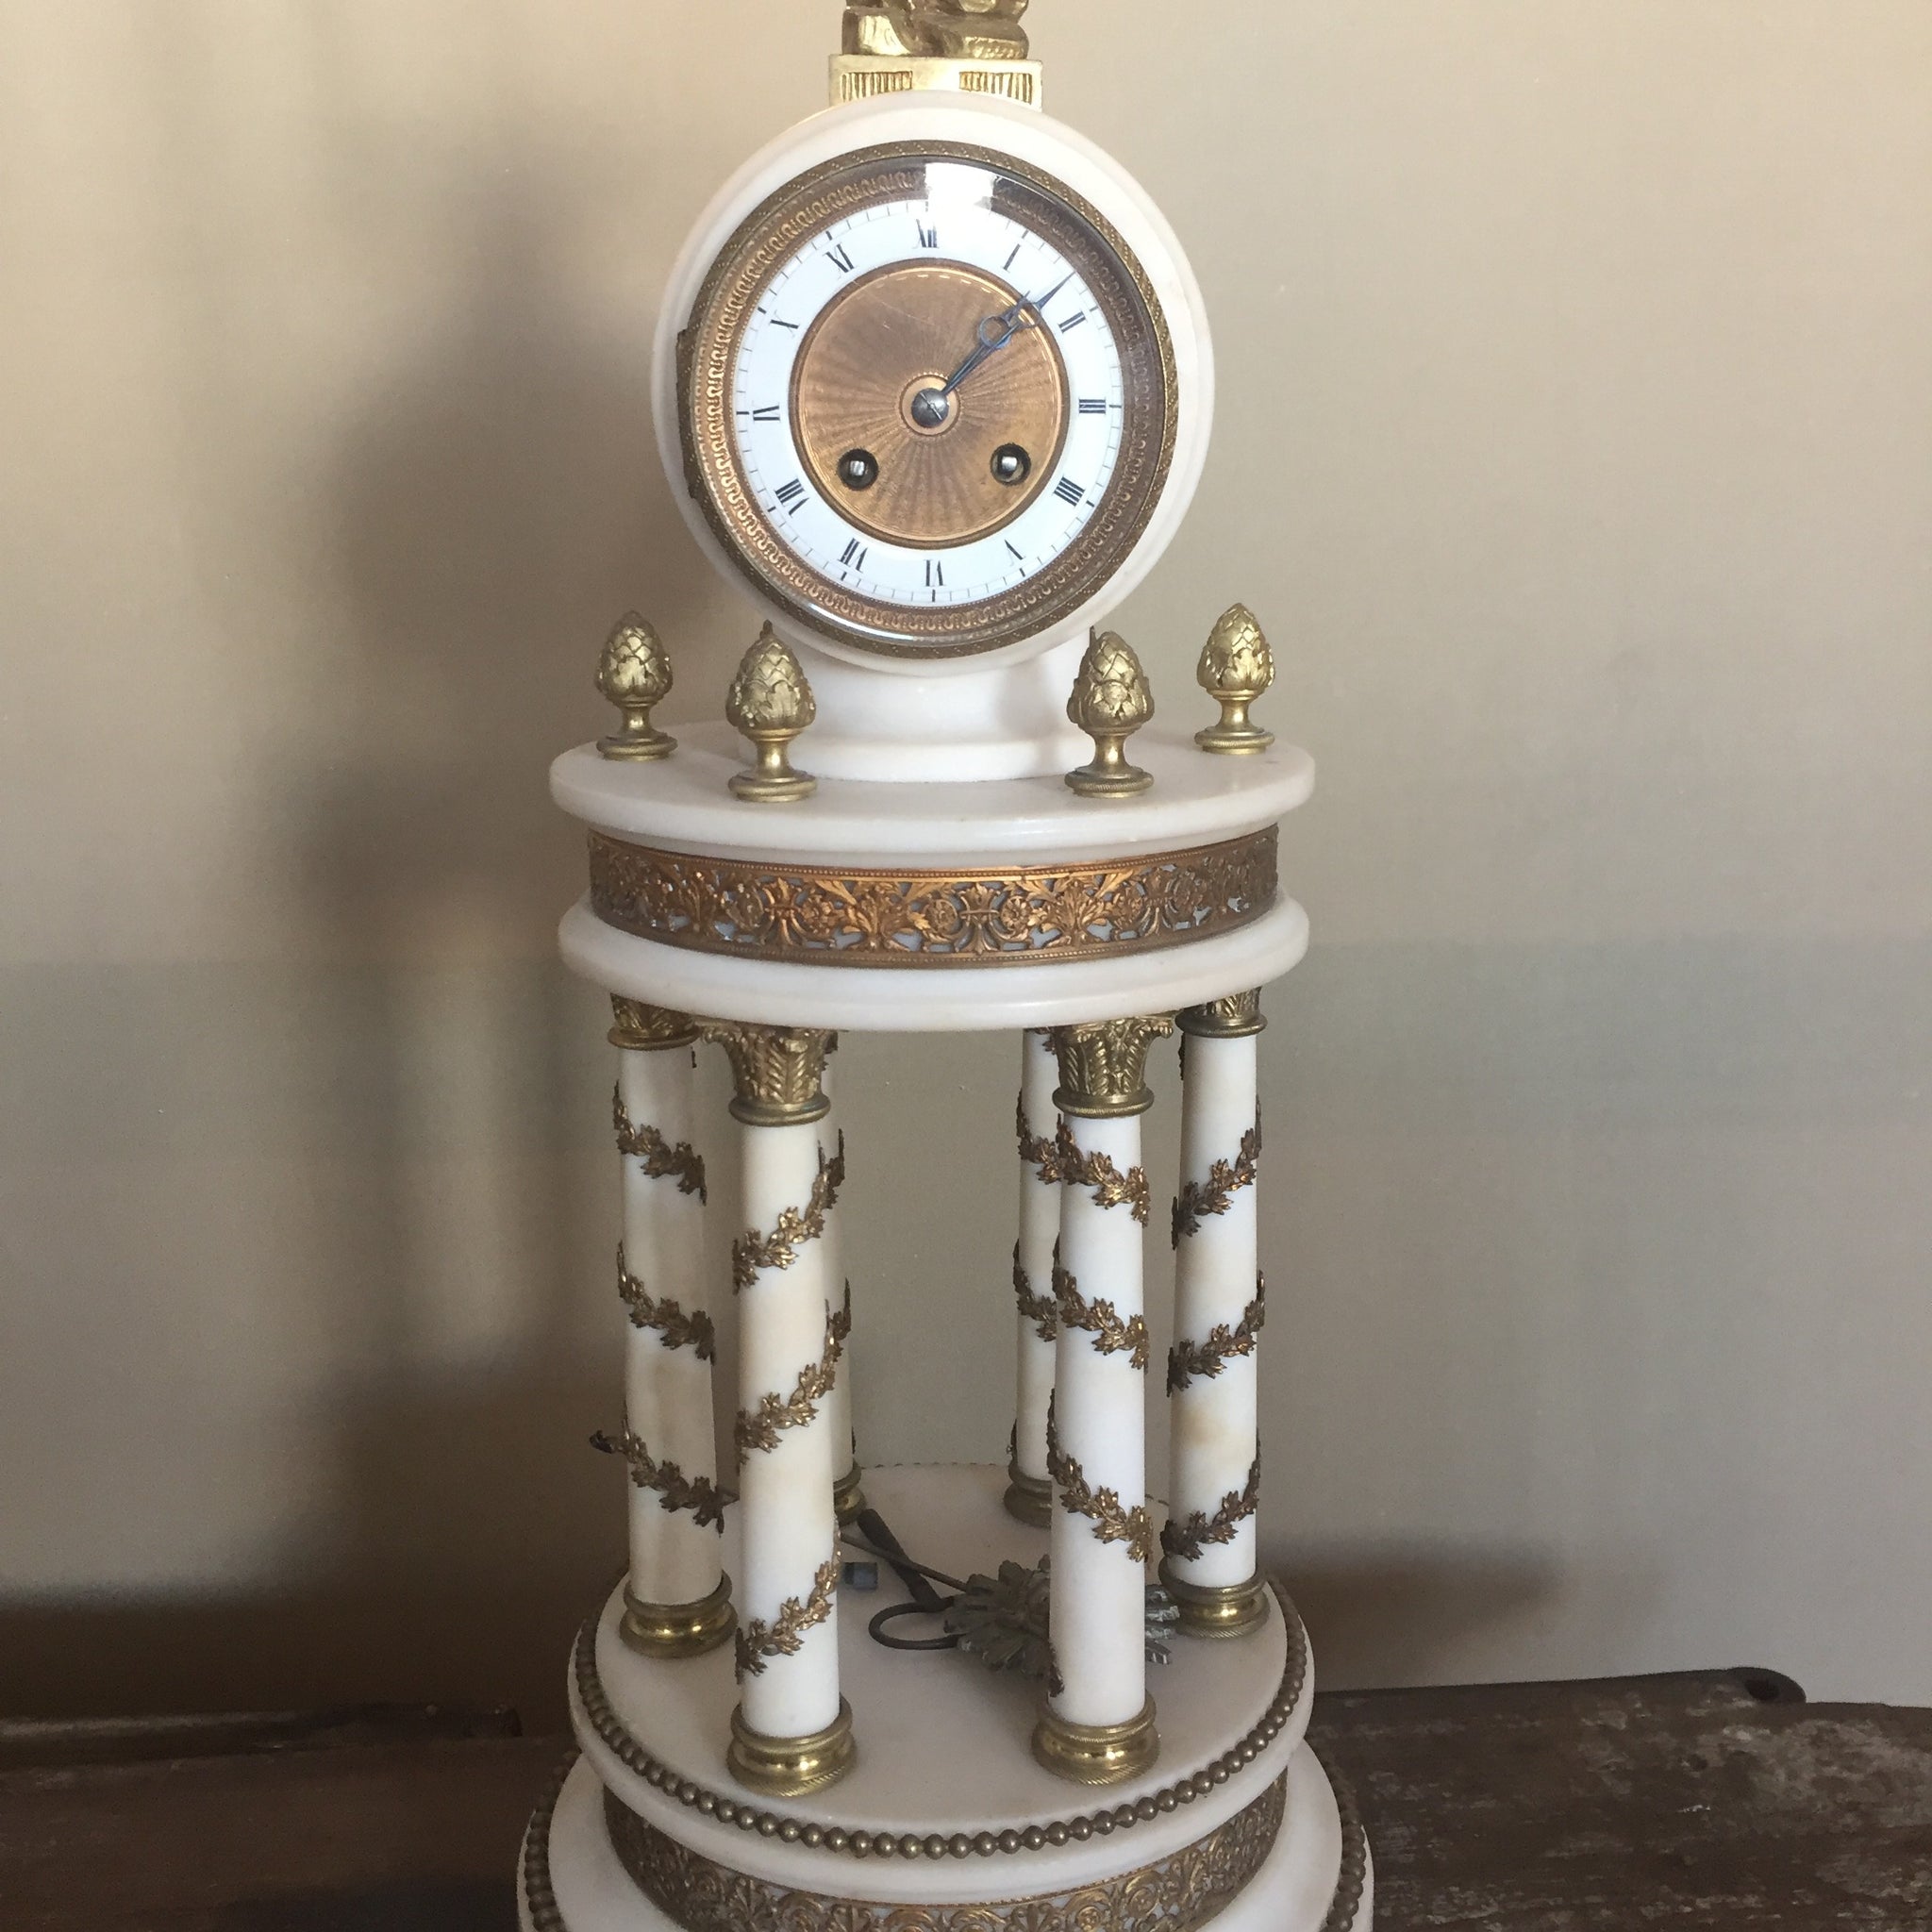 Antique French 1800s Empire style white marble table mantel clock